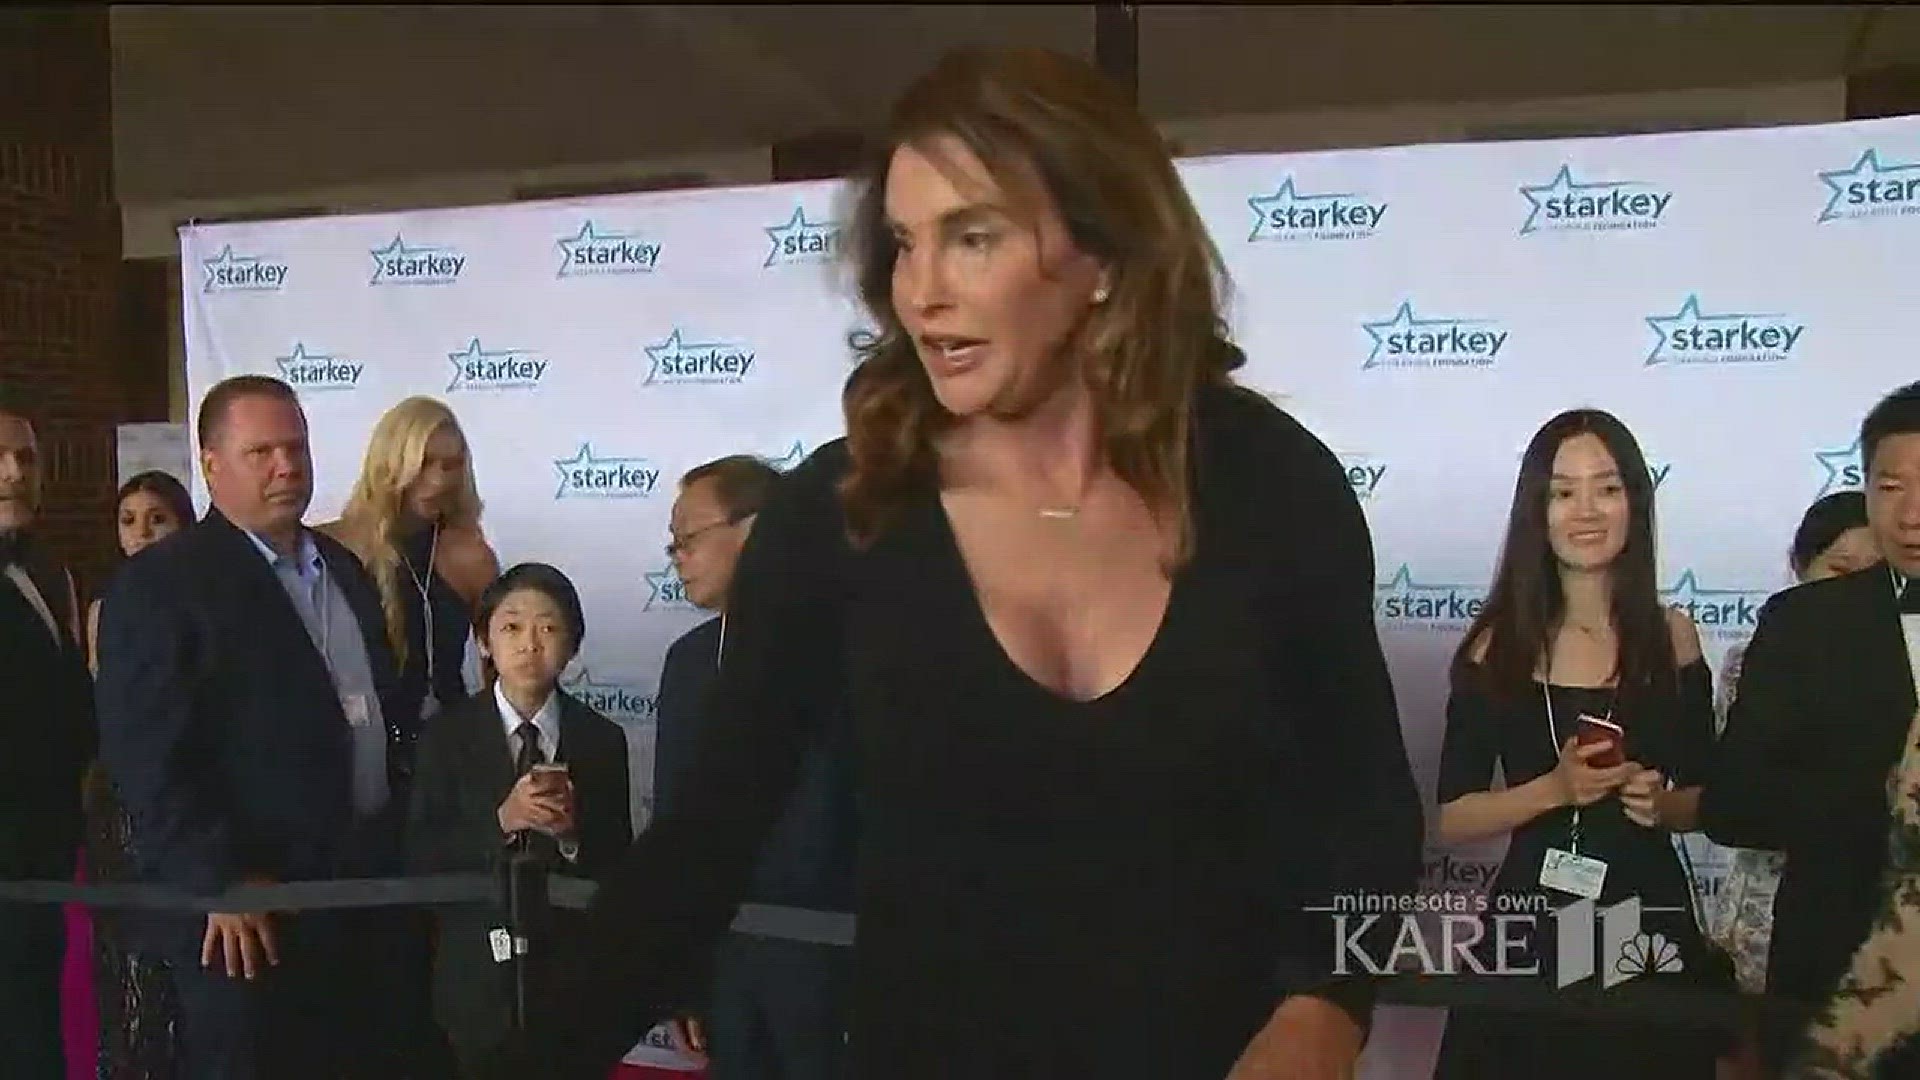 From Steven Tyler to Caitlyn Jenner to Ben Affleck, the stars came out for the 17th annual Starkey Gala. http://kare11.tv/2tZaxBD